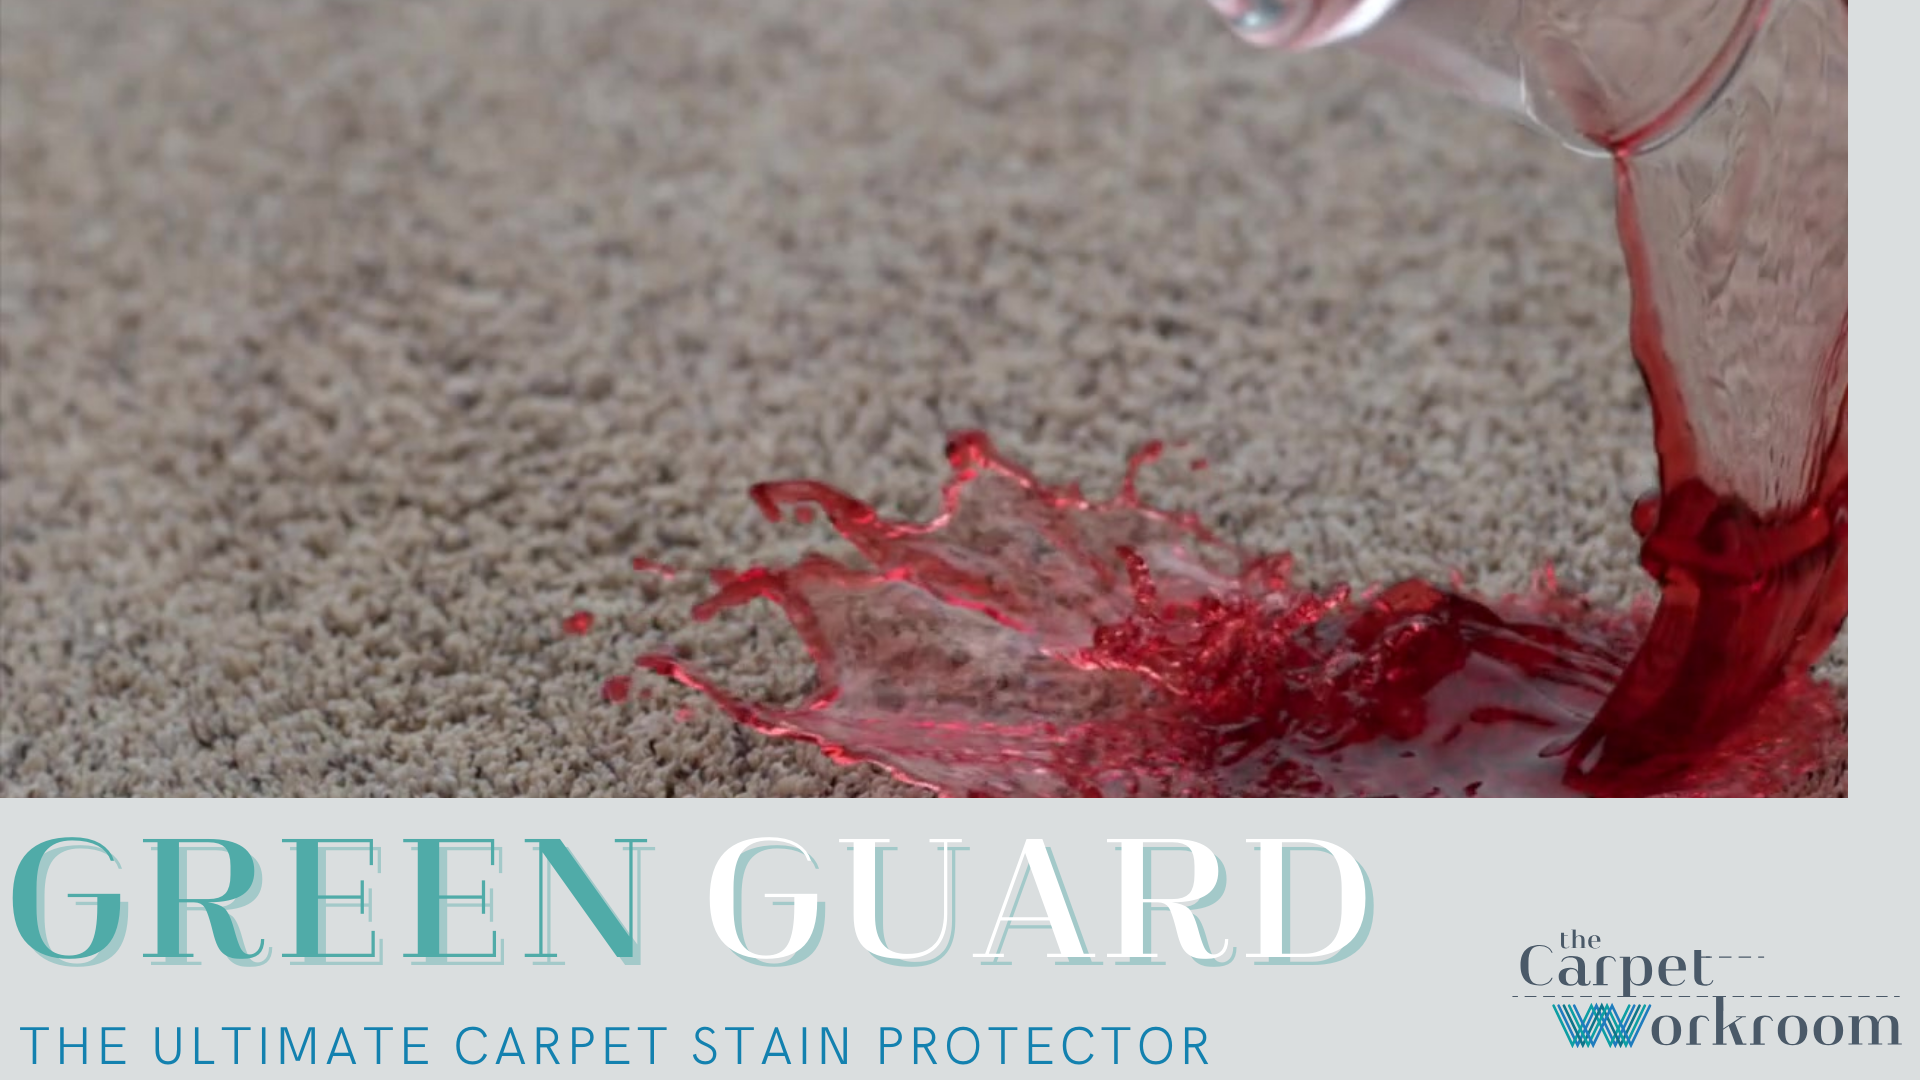 green guard is the ultimate stain protection for carpet